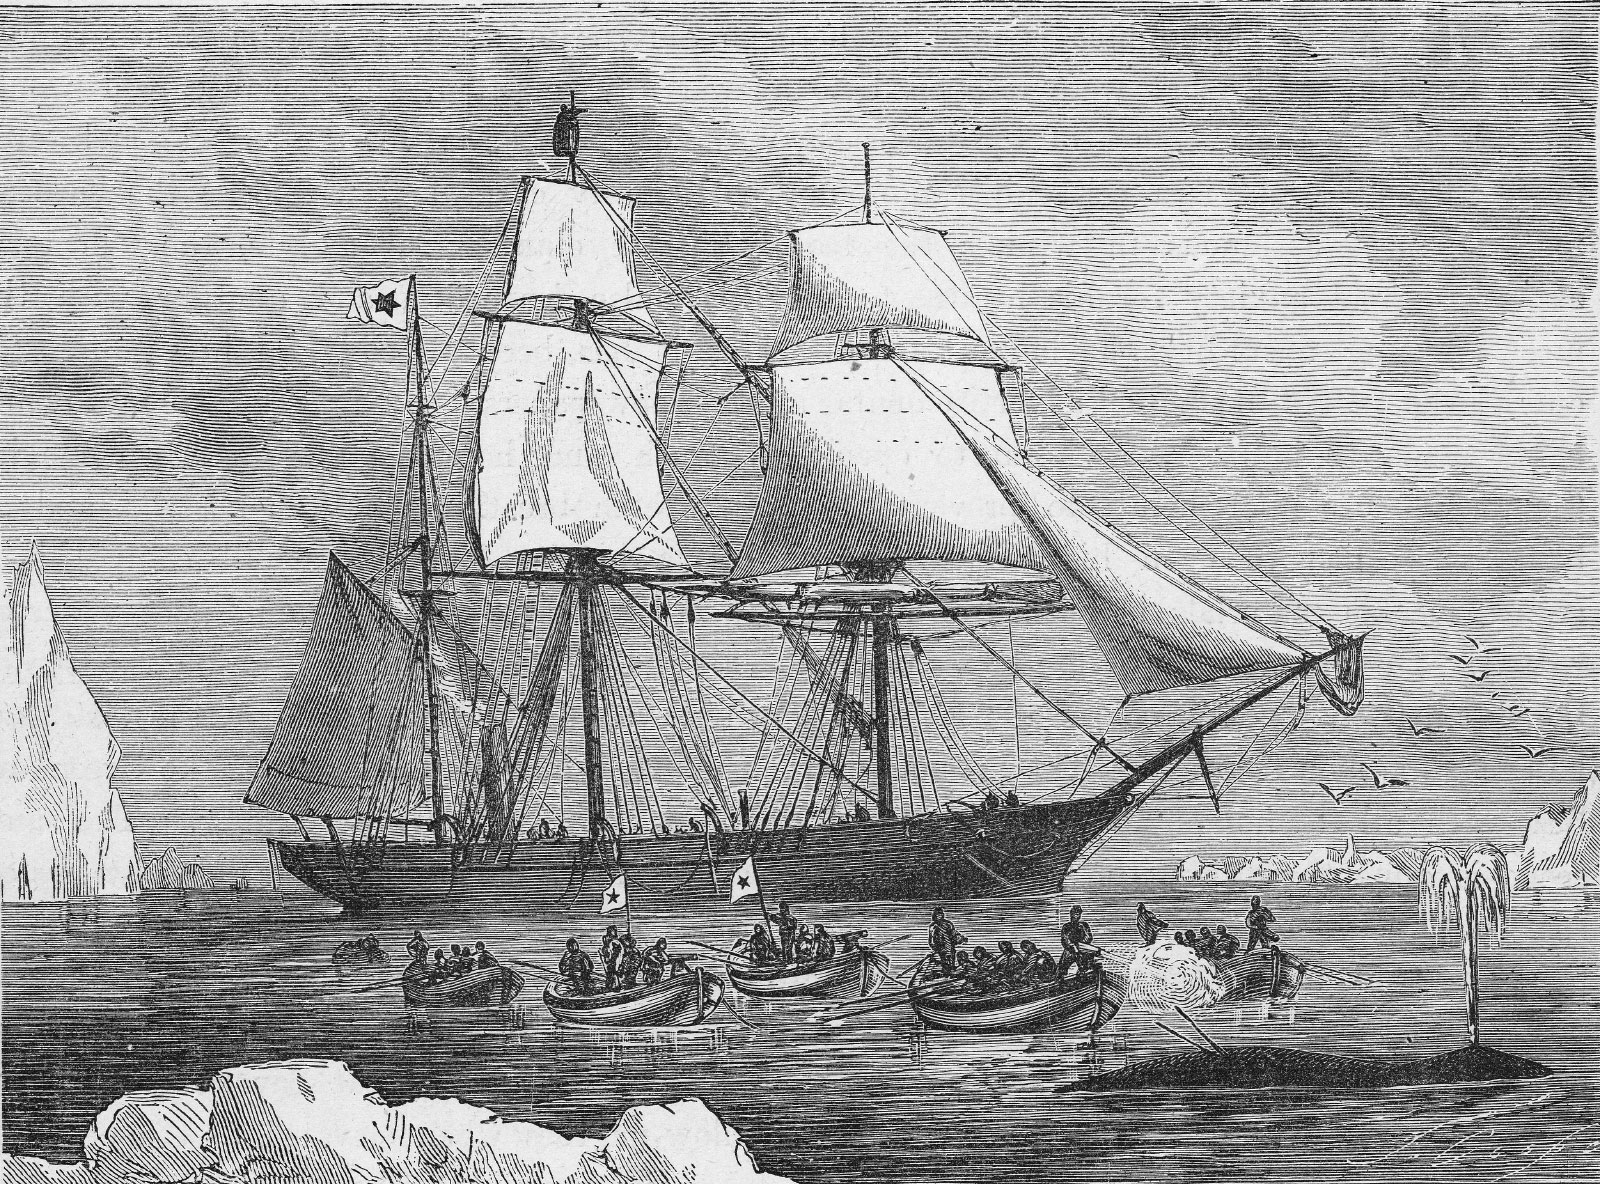 Engraving of a whaling scene, with a large ship in the background and fisherman in boats and a whale in the foreground